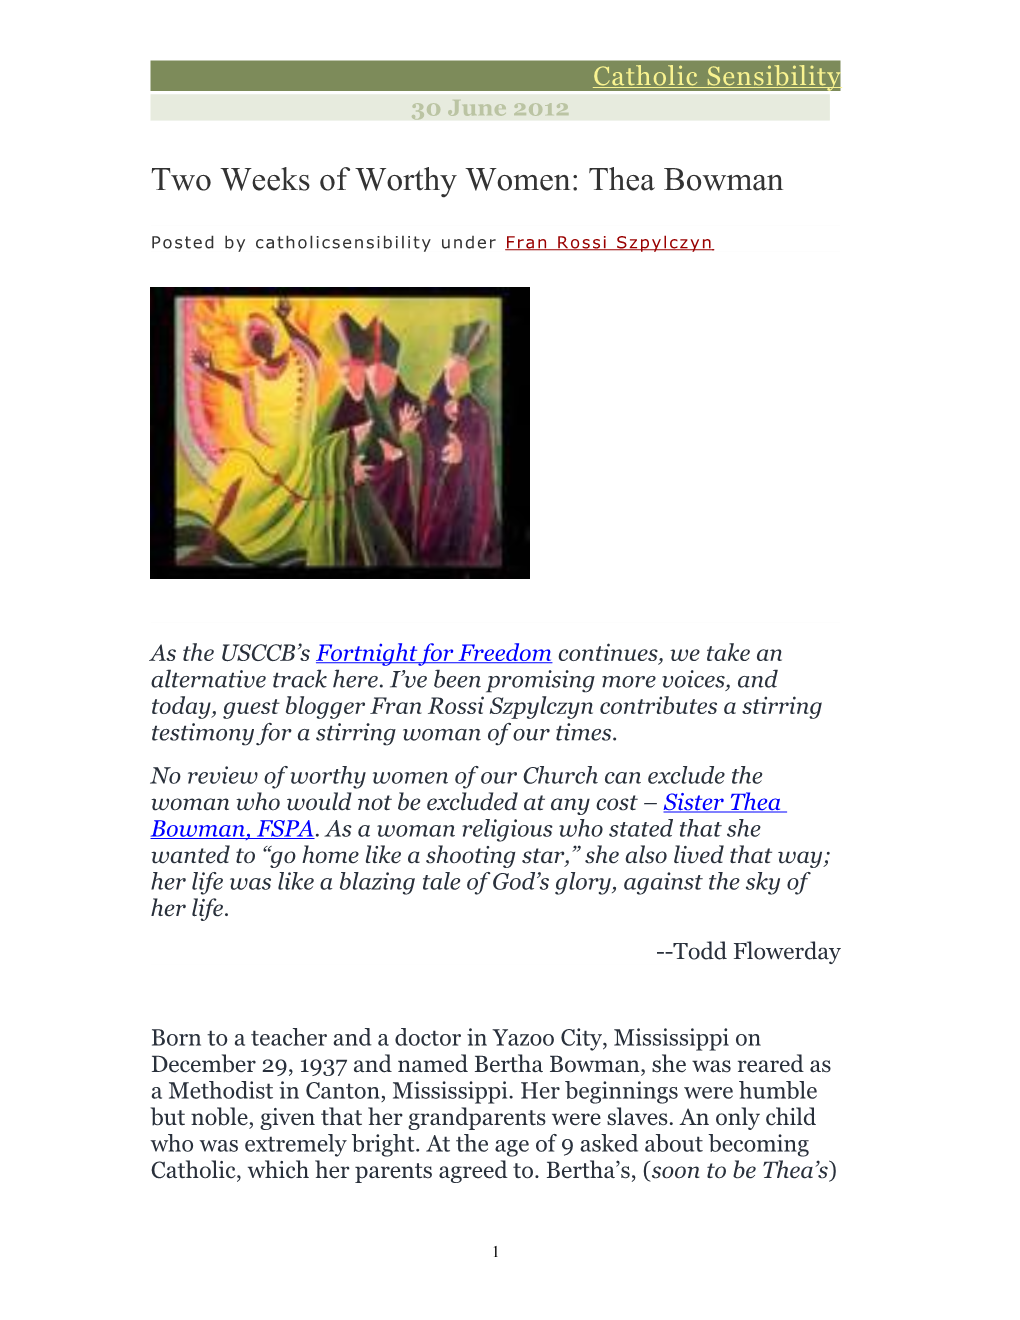 Two Weeks of Worthy Women: Theabowman